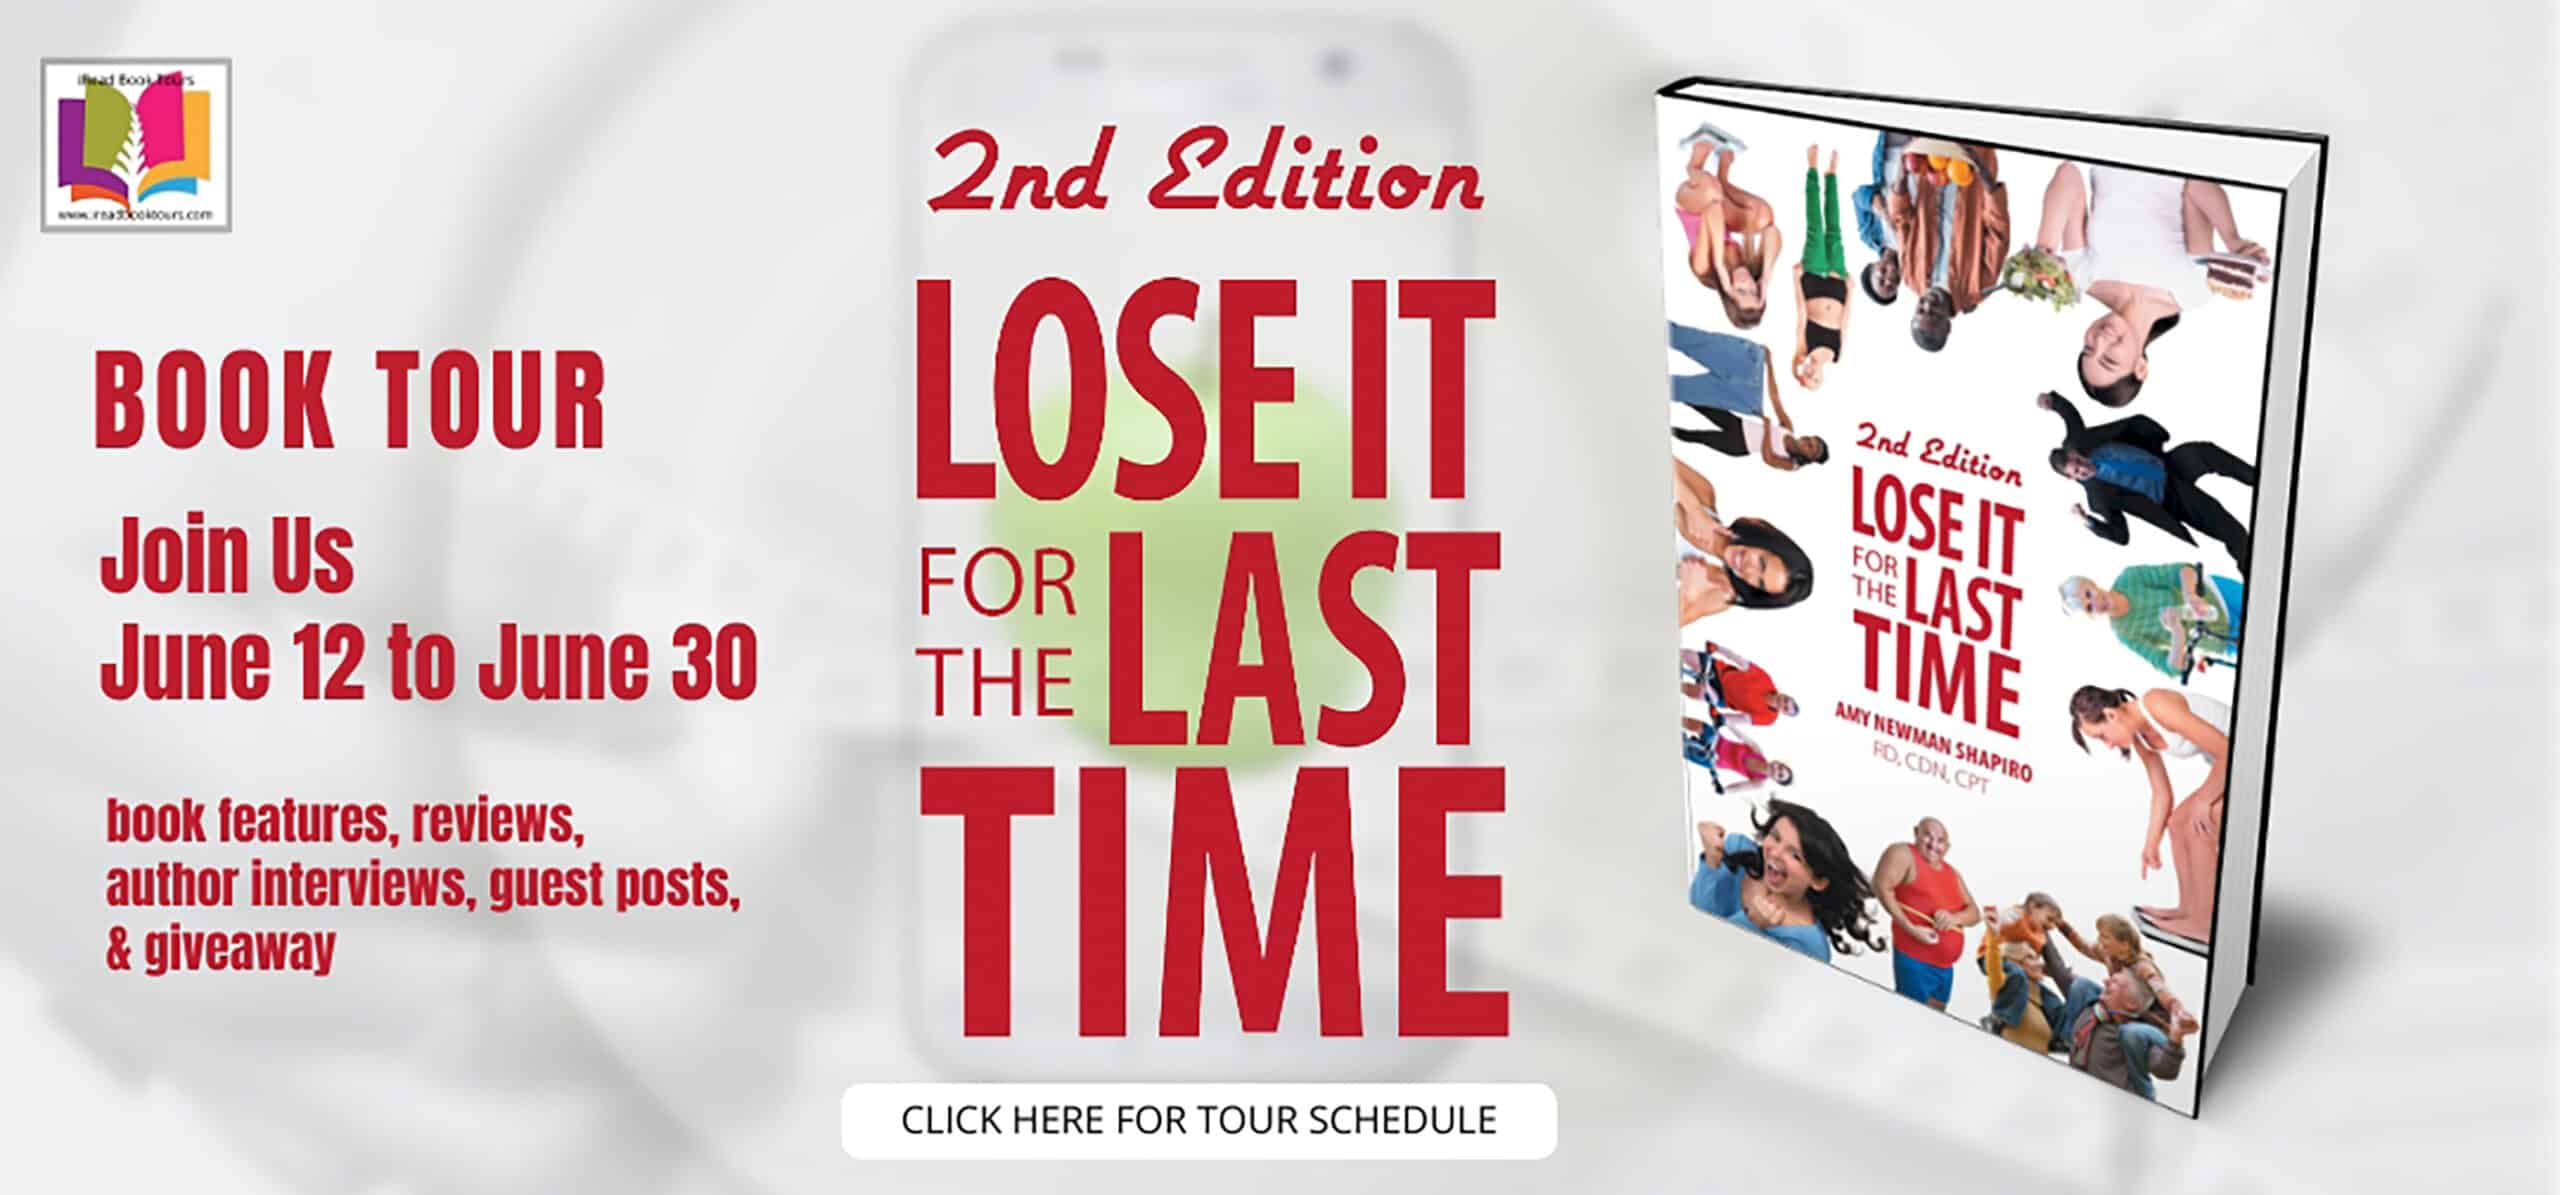 Review: Lose It For The Last Time 2nd Edition by Amy Newman Shapiro | Healthy Eating ~ Guest Post from the Author ~ Giveaway | @iReadBookTours